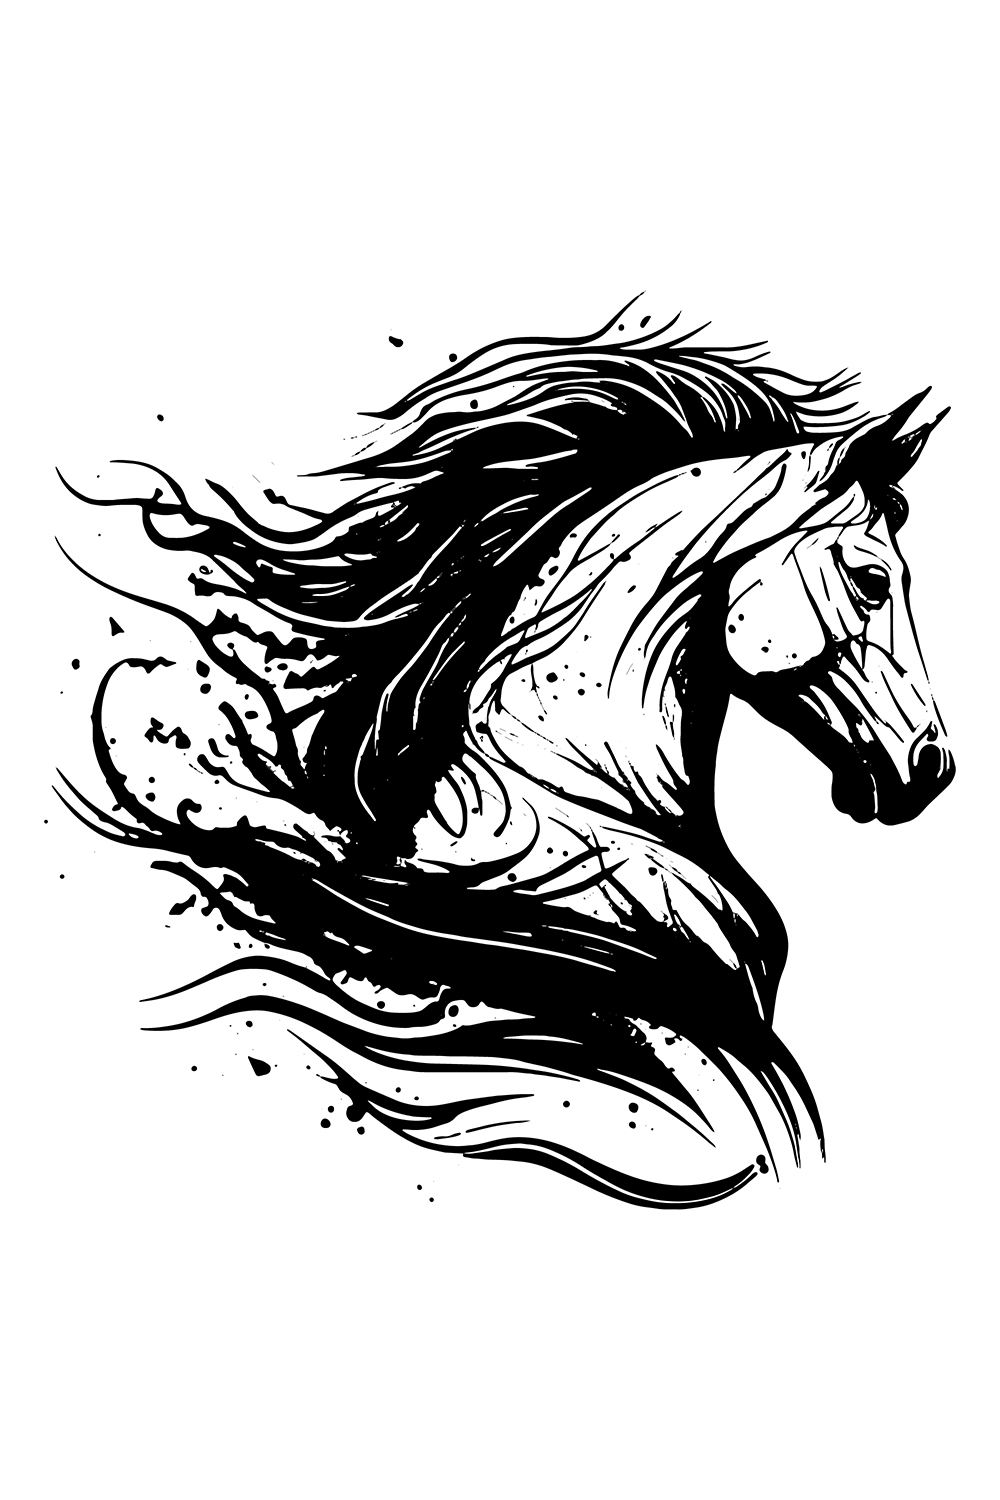 Pin by Erica Wagener on Tattoos | Horse stencil, Nordic tattoo, Horse tattoo